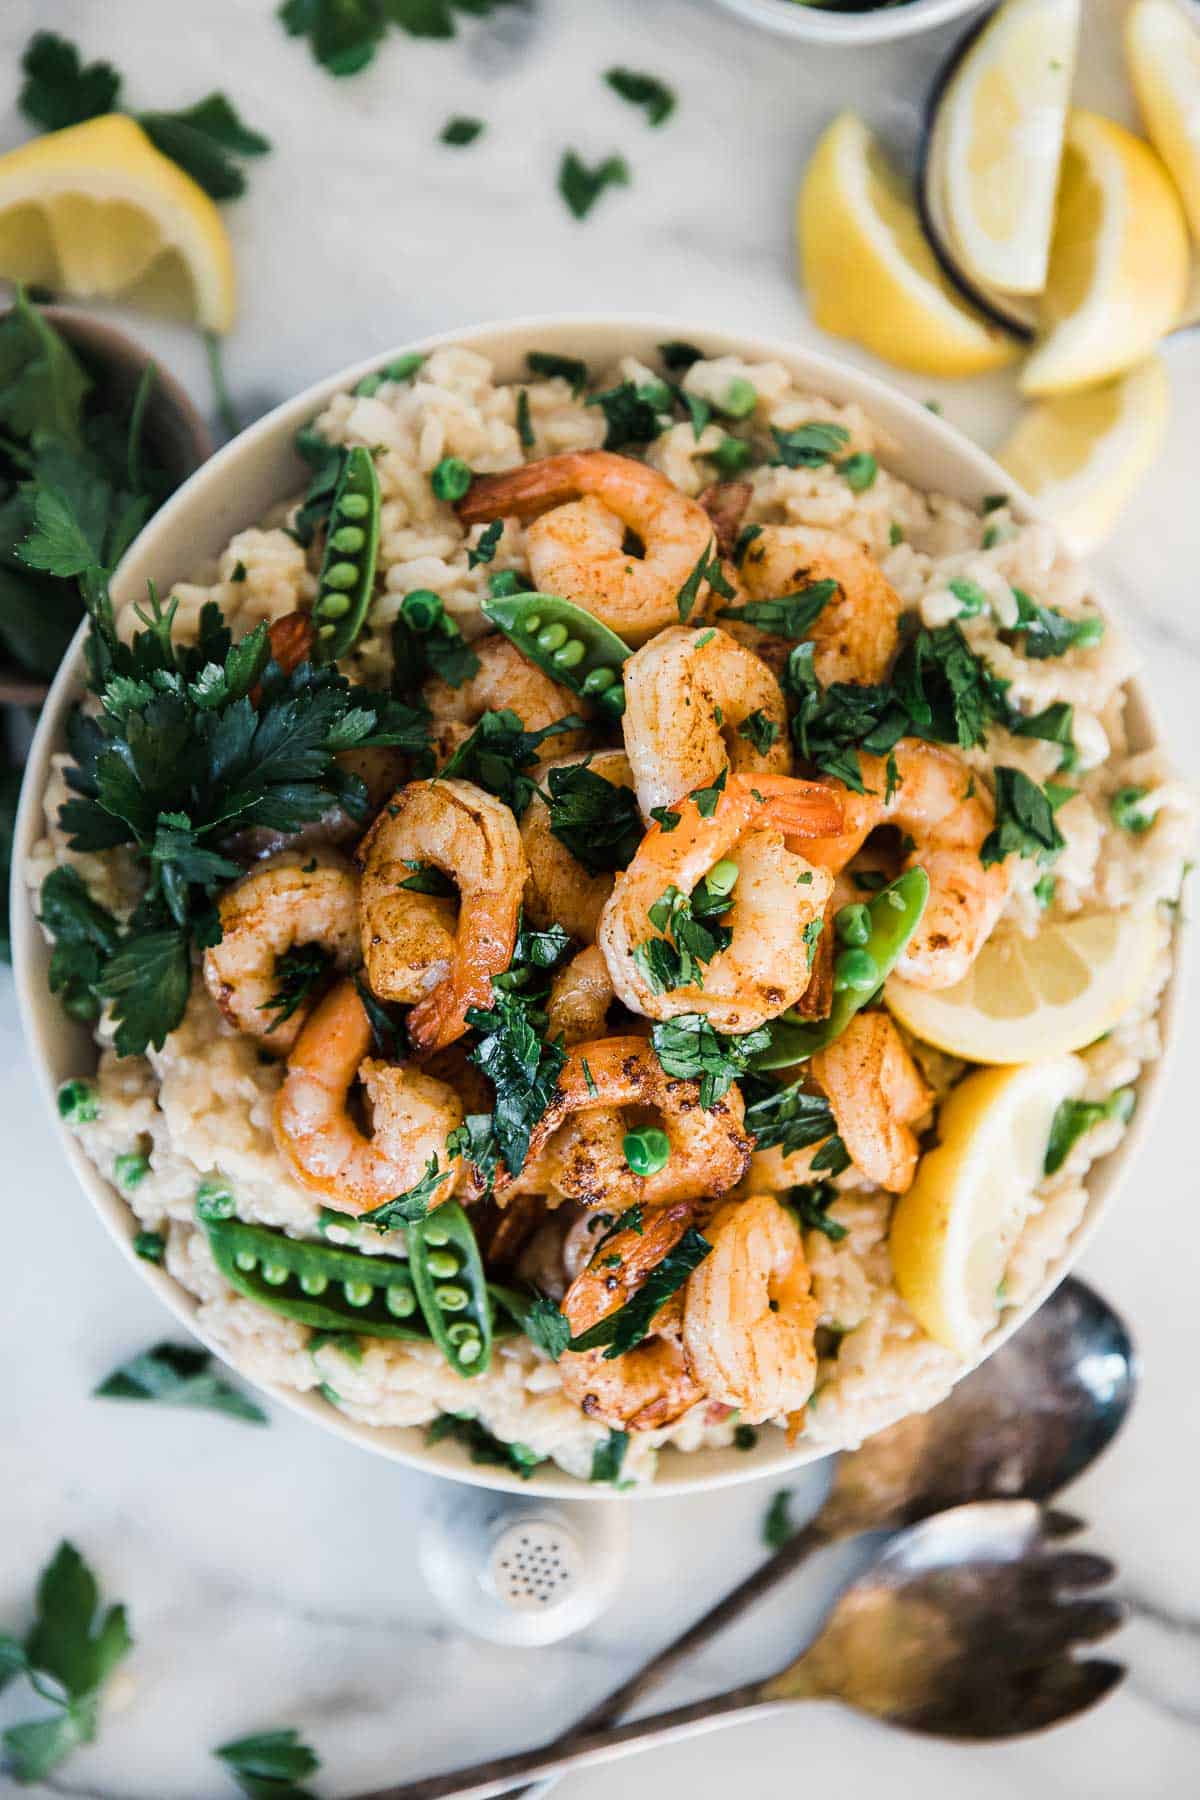 Shrimp risotto recipe in a white bowl. There are jumbo shrimp piled high, and it is garnished with parsley.